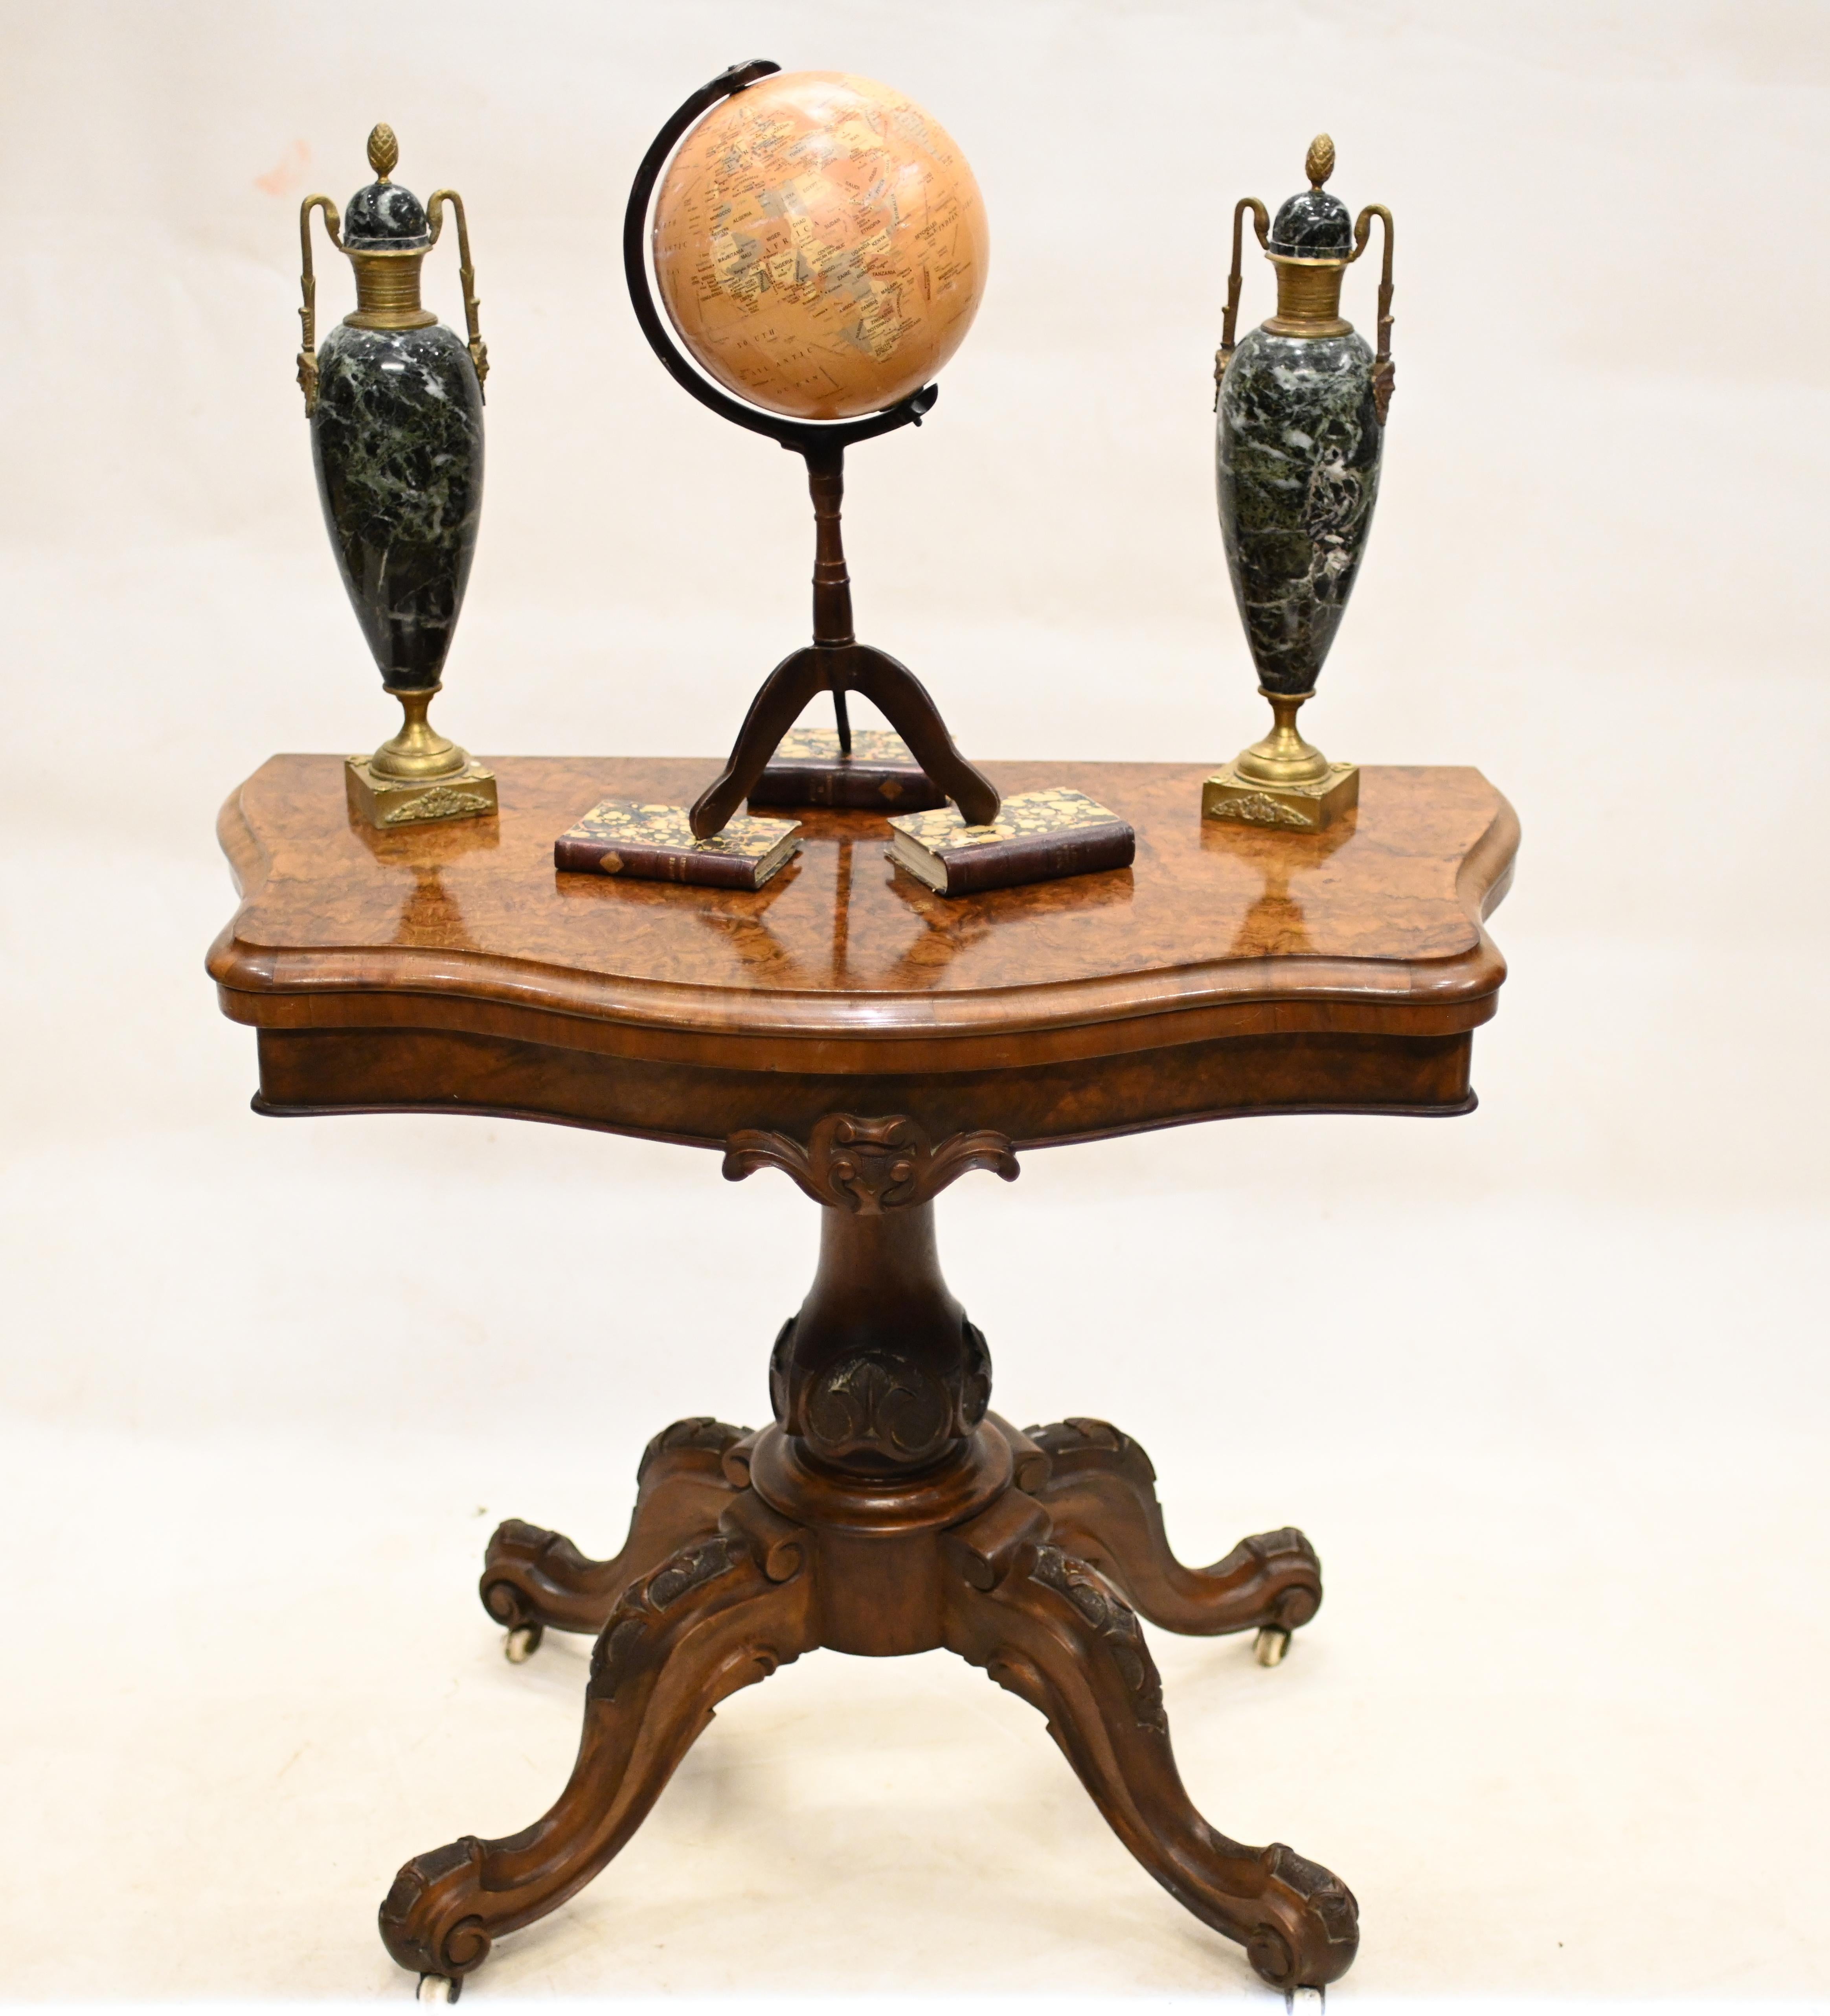 Quality Victorian card table in burr walnut
We date this piece to circa 1880
Table opens out to reveal green beize lined playing surface for cards or board games
Table can also serve as a decorative hall table
Bought from a private residence in